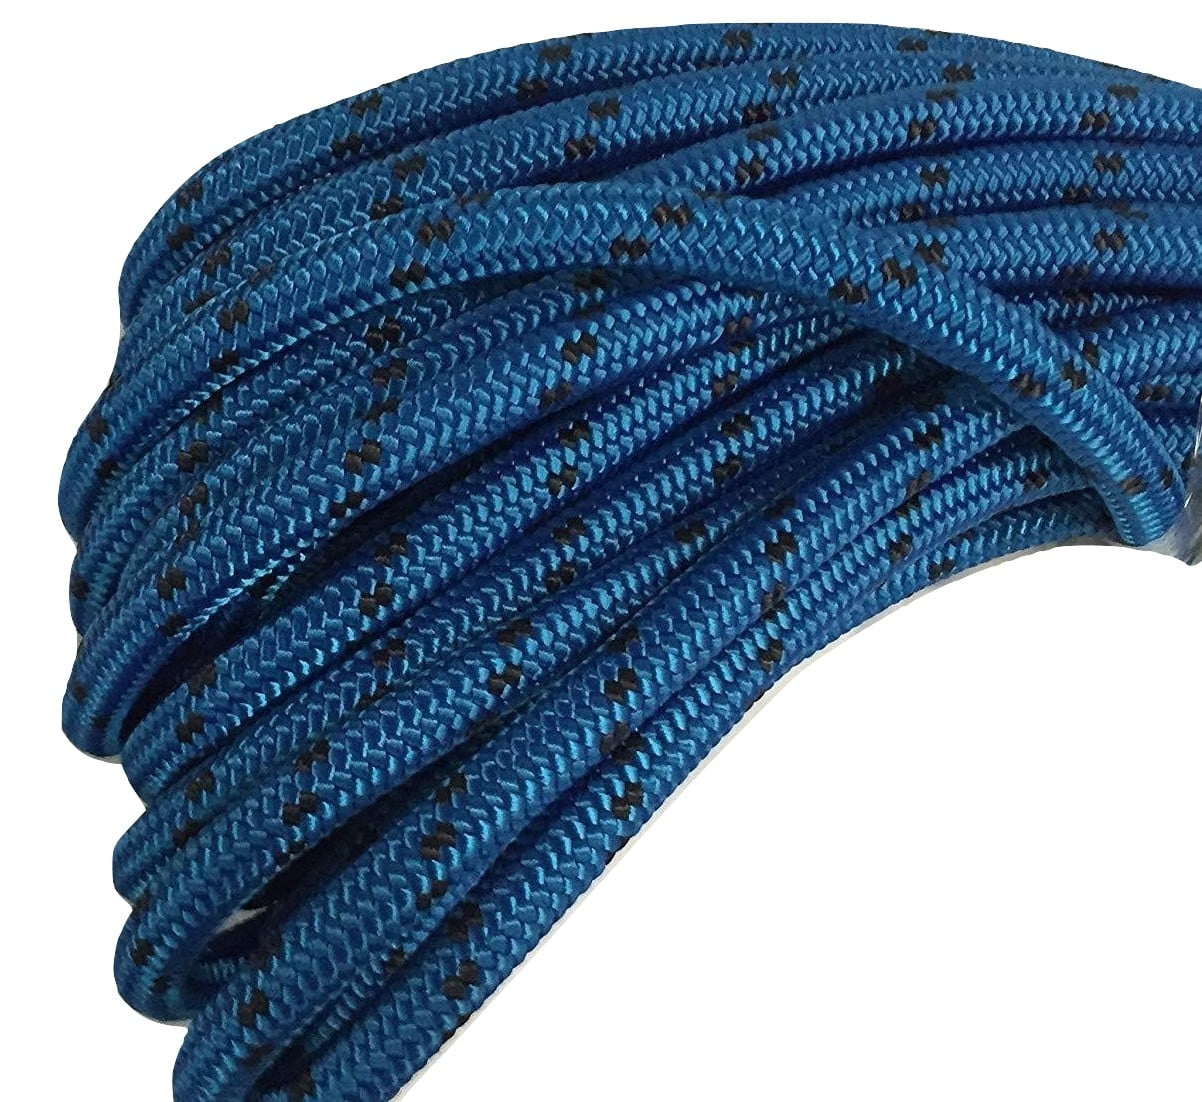 5/8" x 150' Double Braided Polyester Bull Rope 